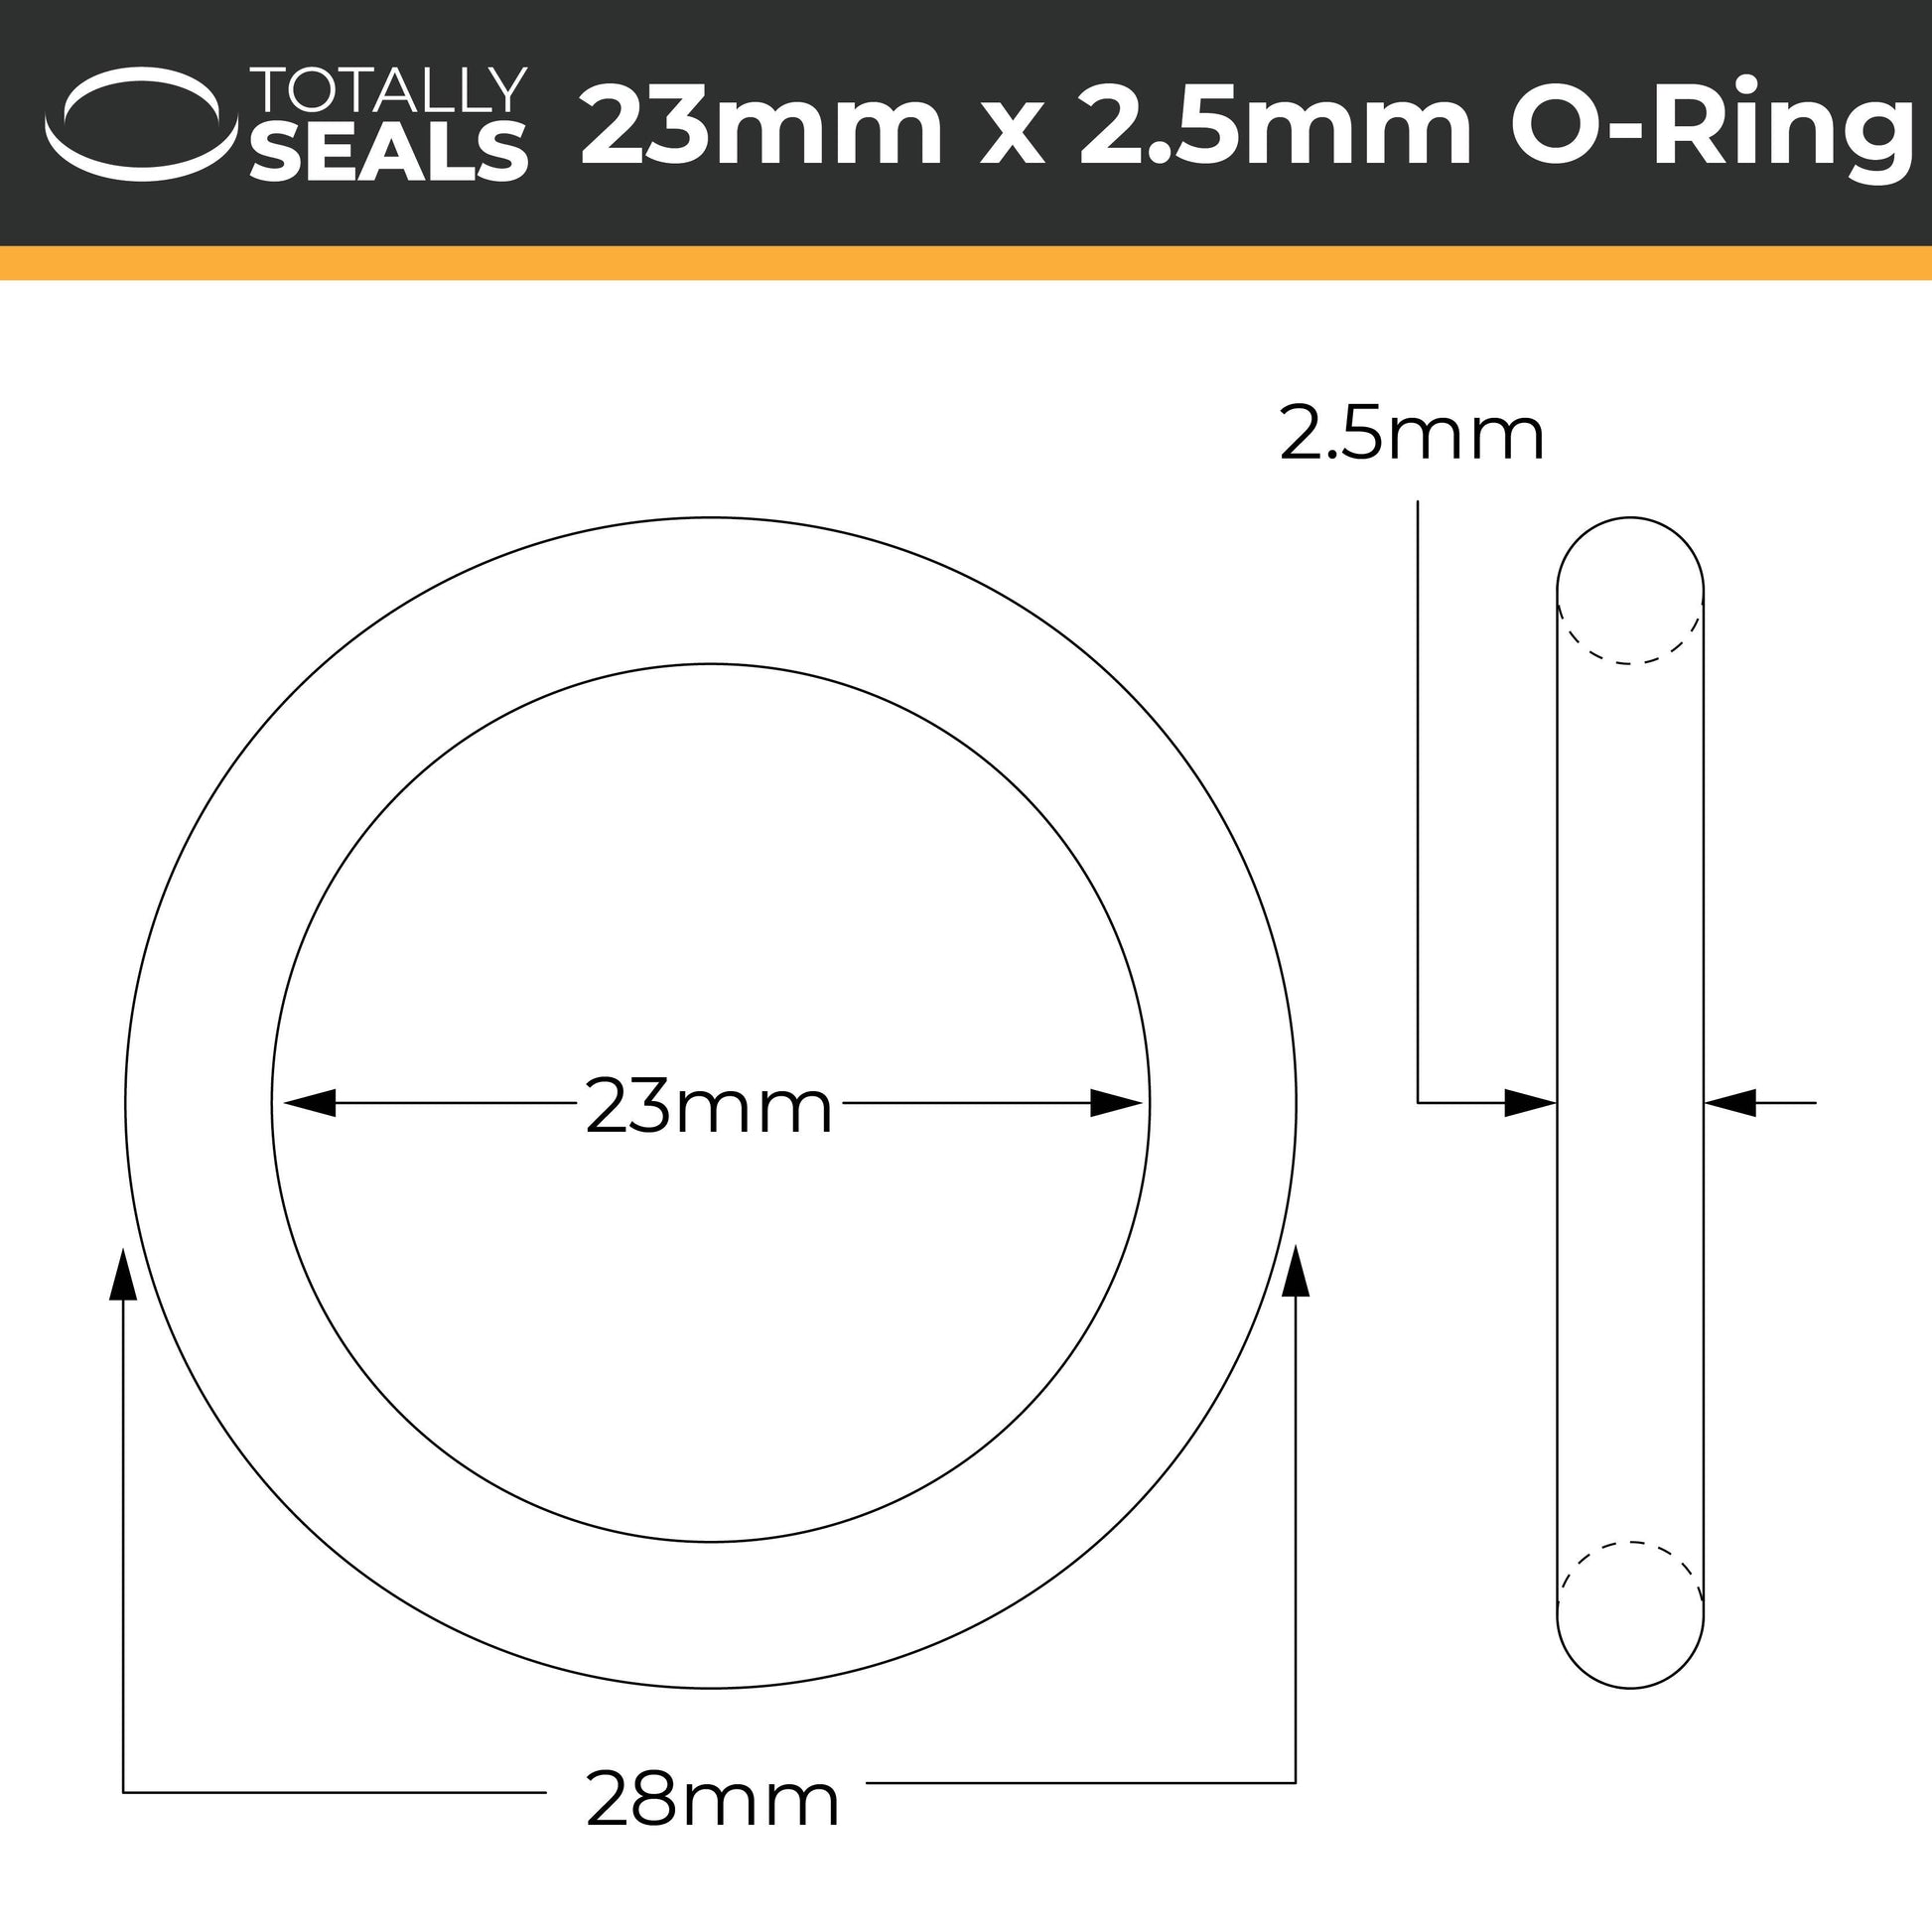 23mm x 2.5mm (28mm OD) Nitrile O-Rings - Totally Seals®